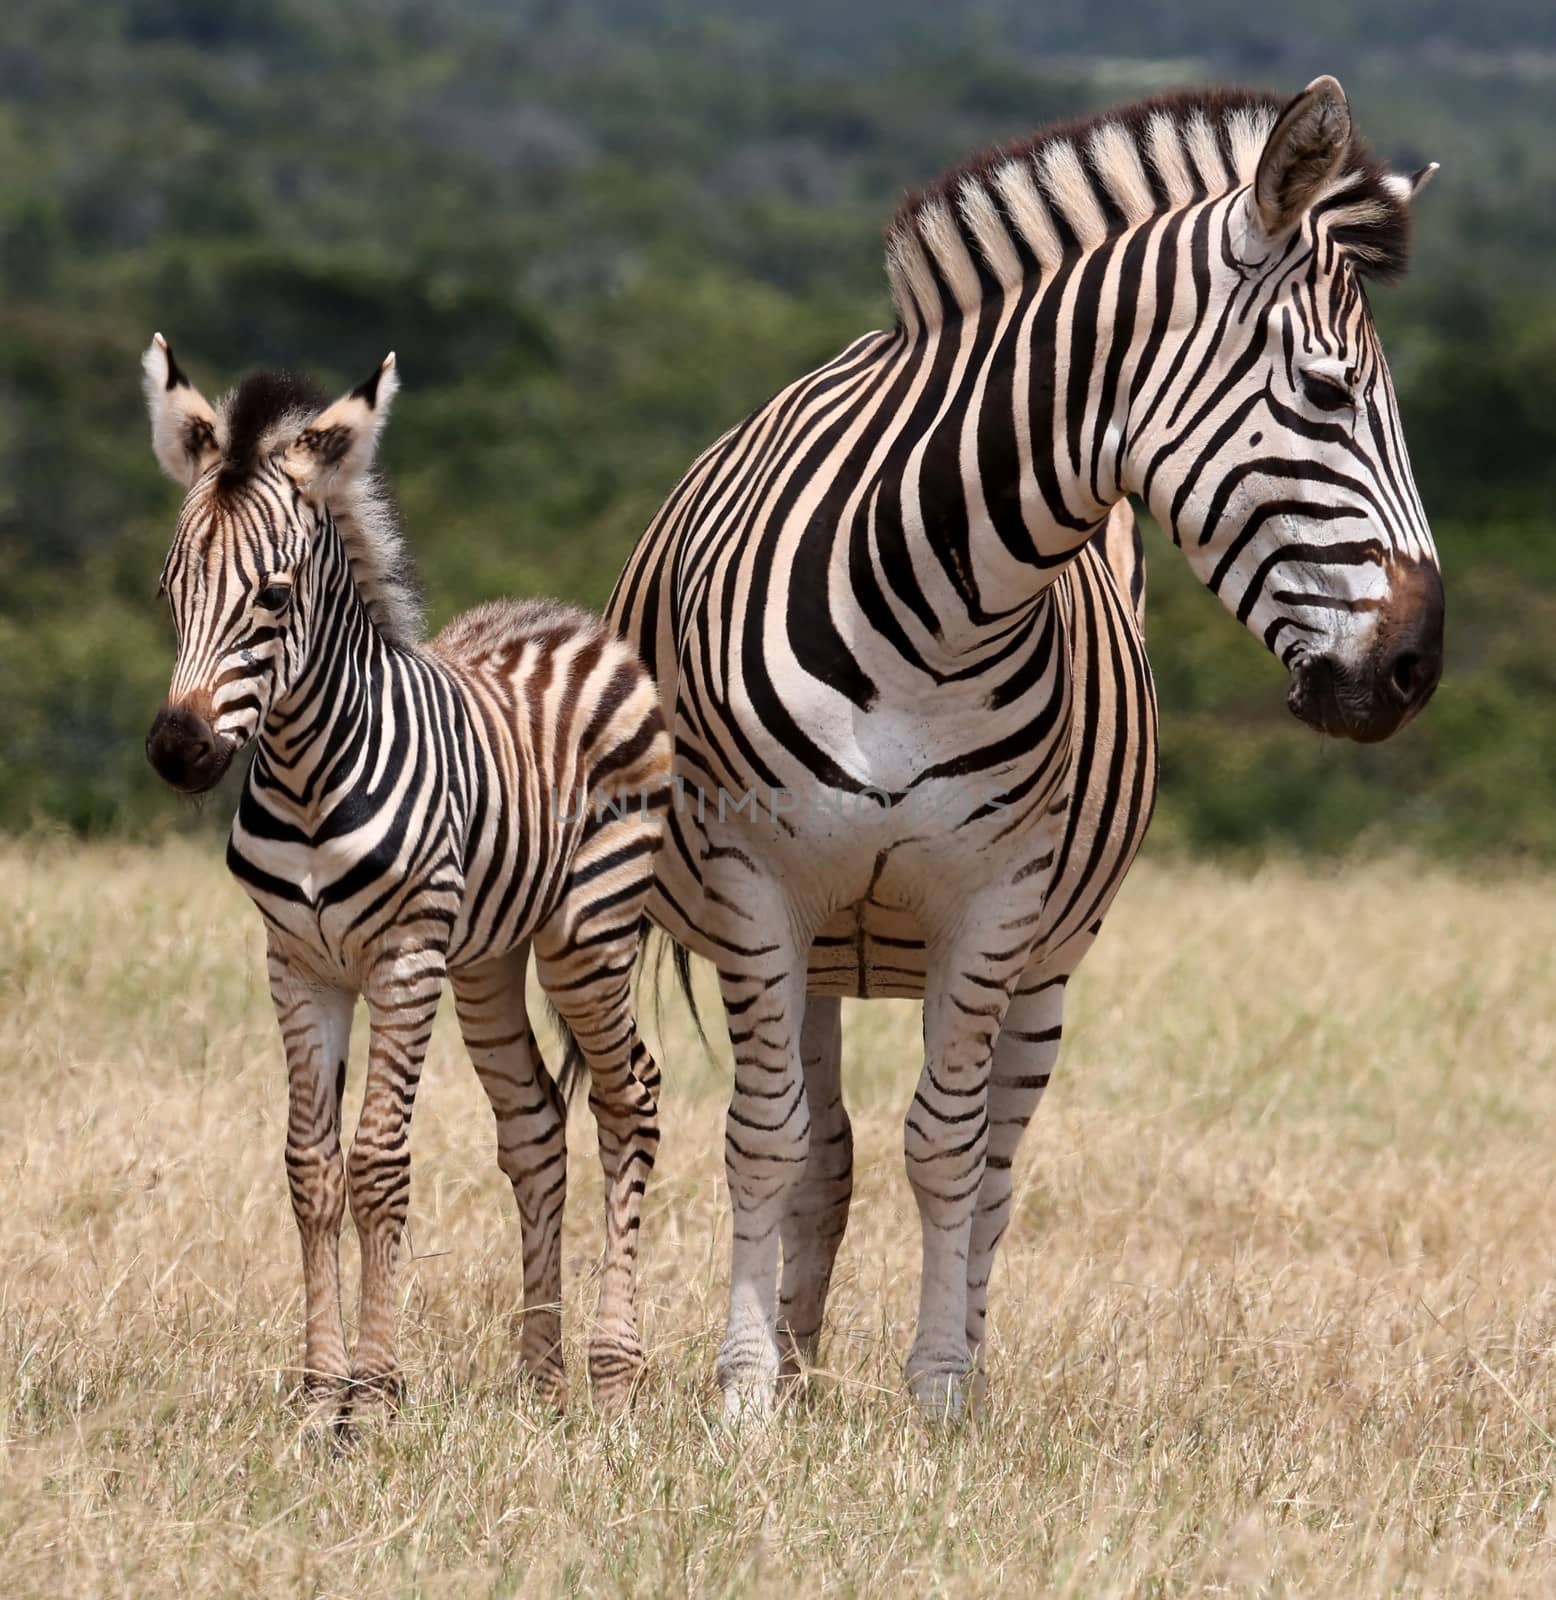 Cute baby plains zebra standing next to it's protective mother